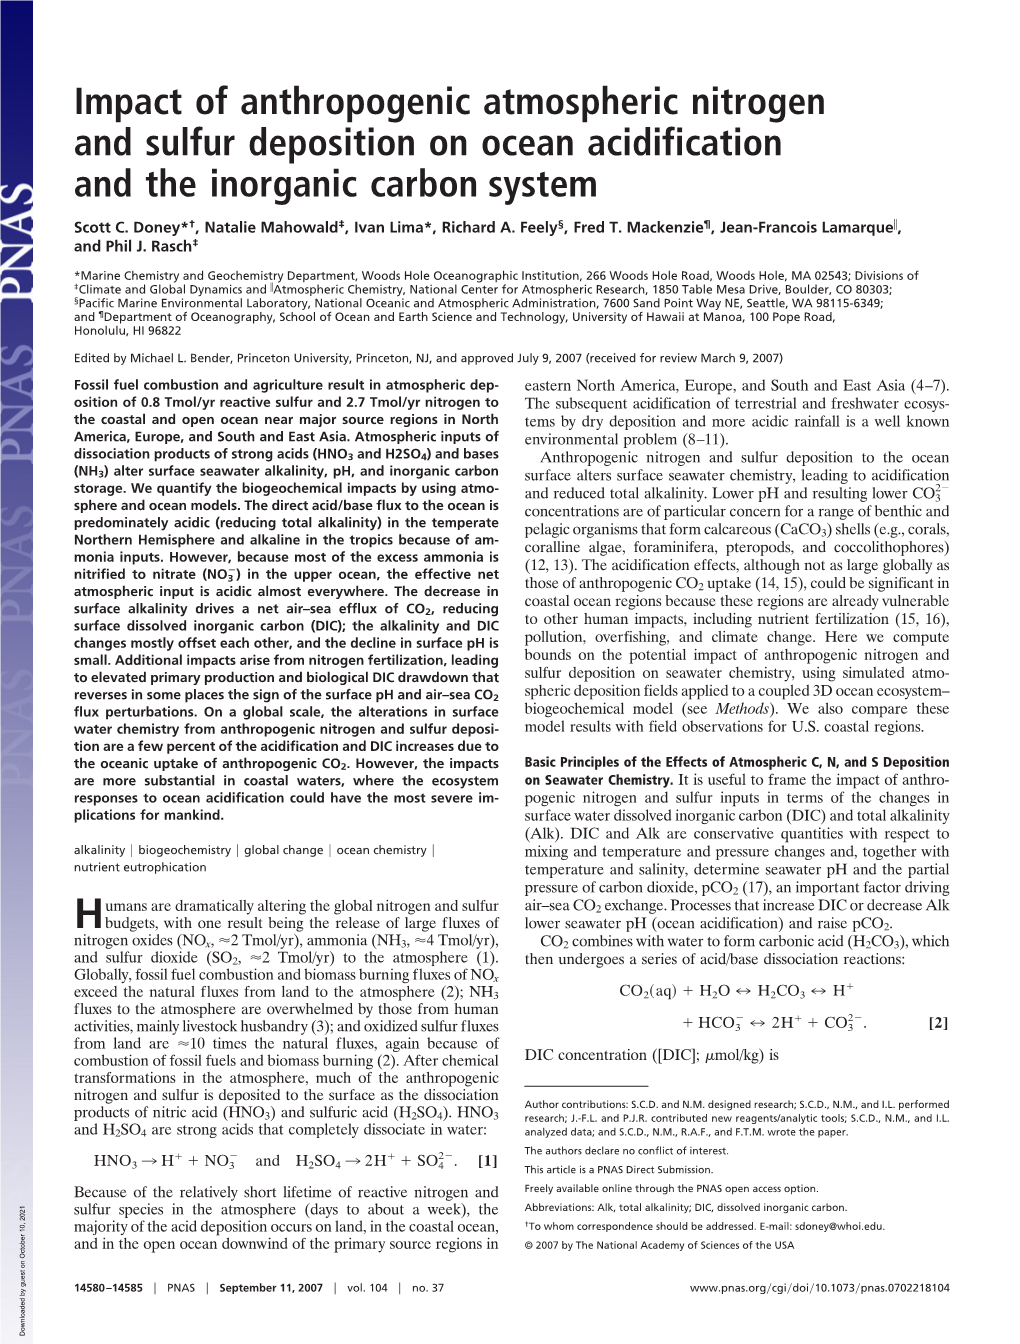 Impact of Anthropogenic Atmospheric Nitrogen and Sulfur Deposition on Ocean Acidification and the Inorganic Carbon System